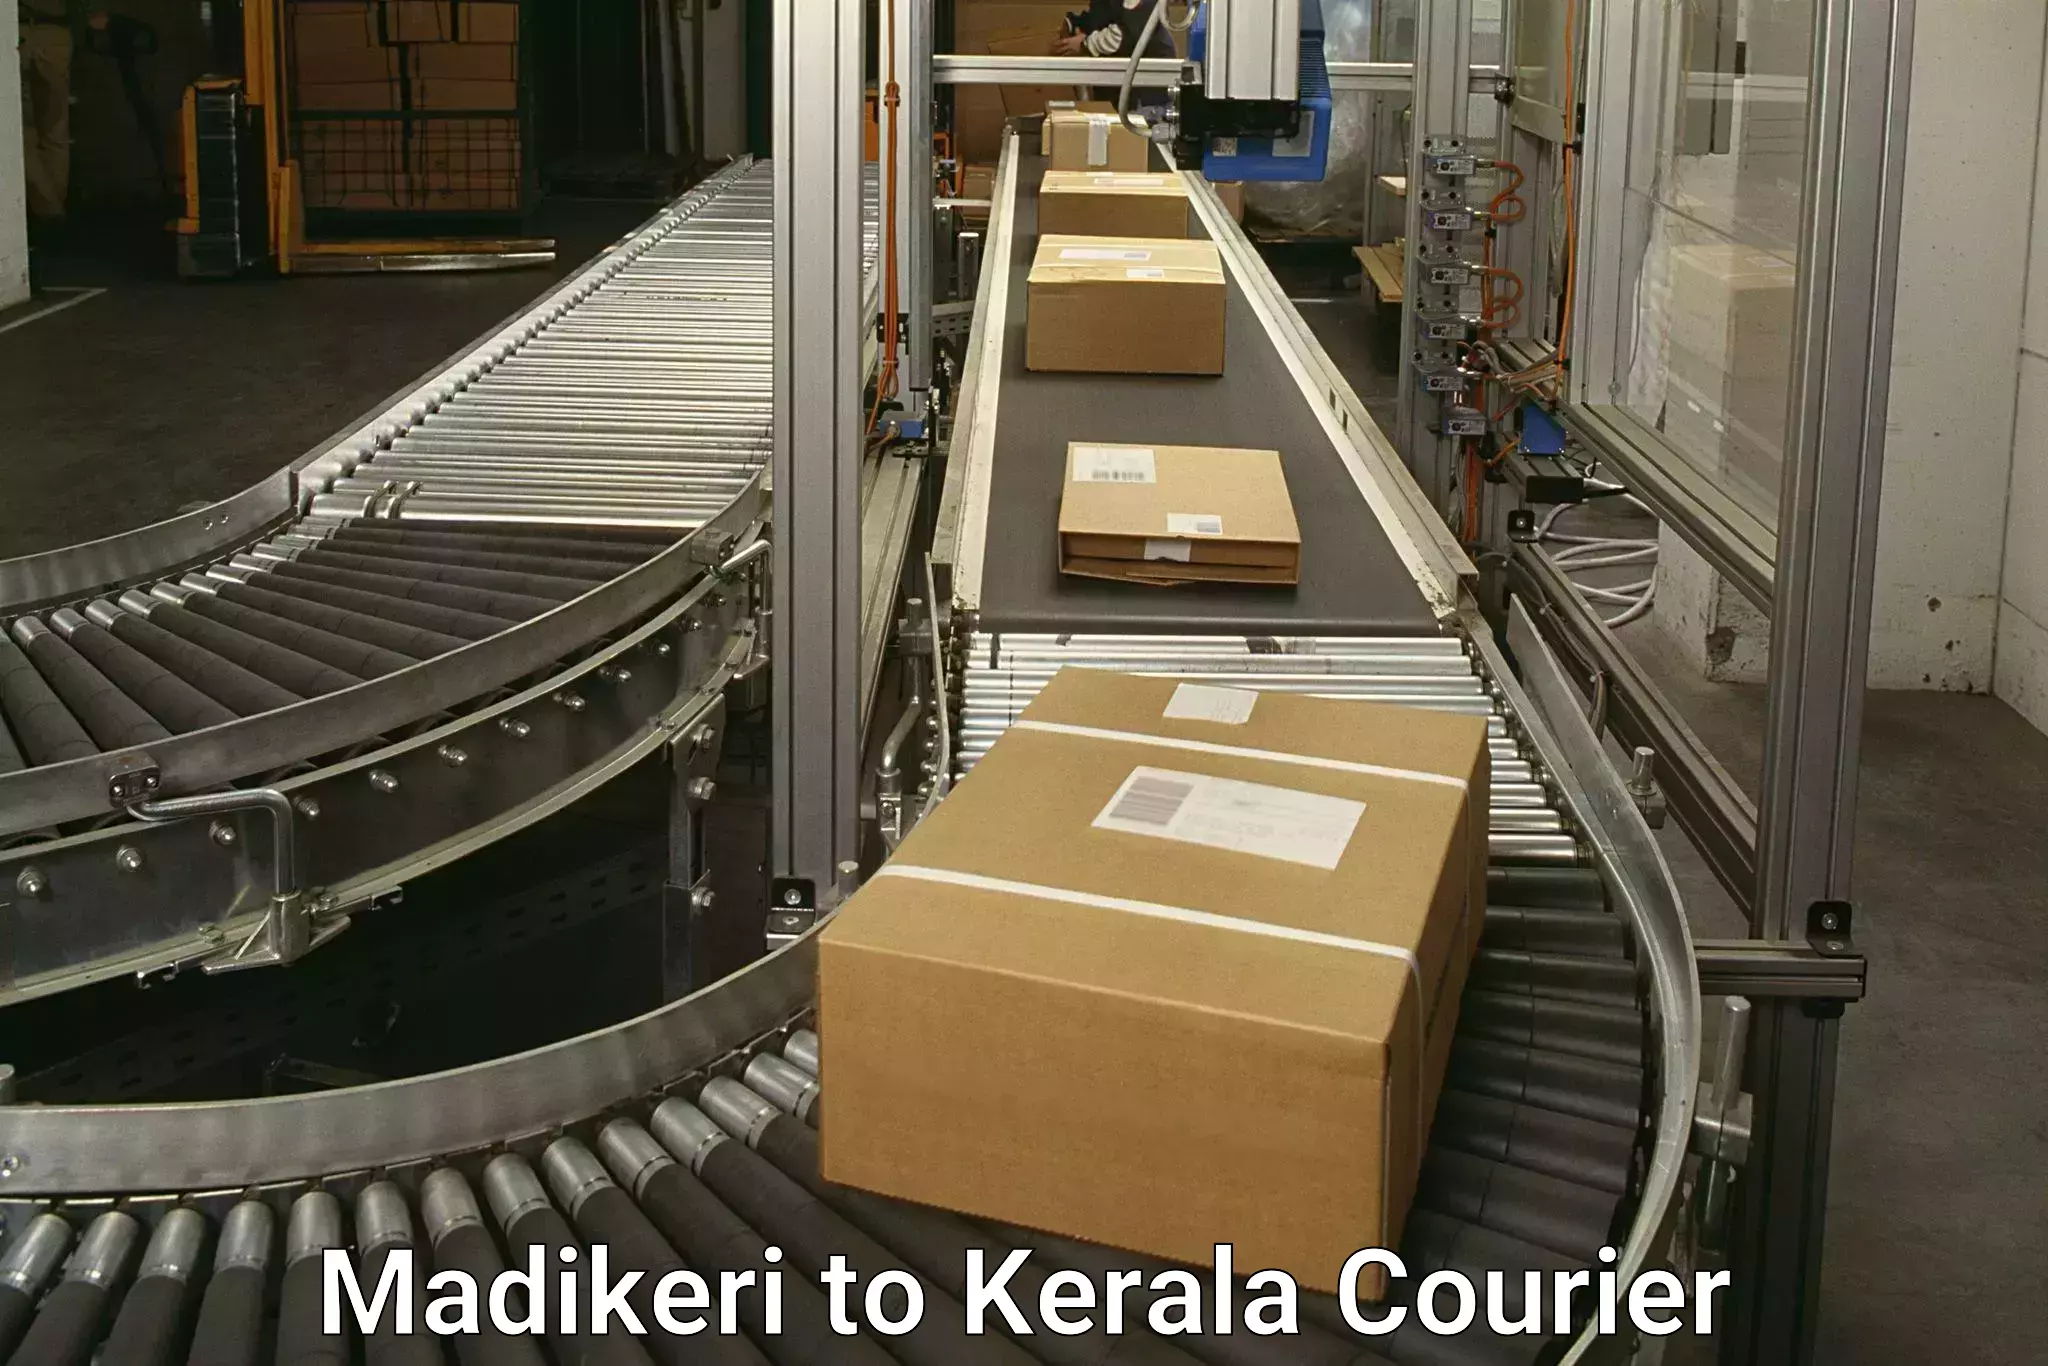 Global shipping networks in Madikeri to Calicut